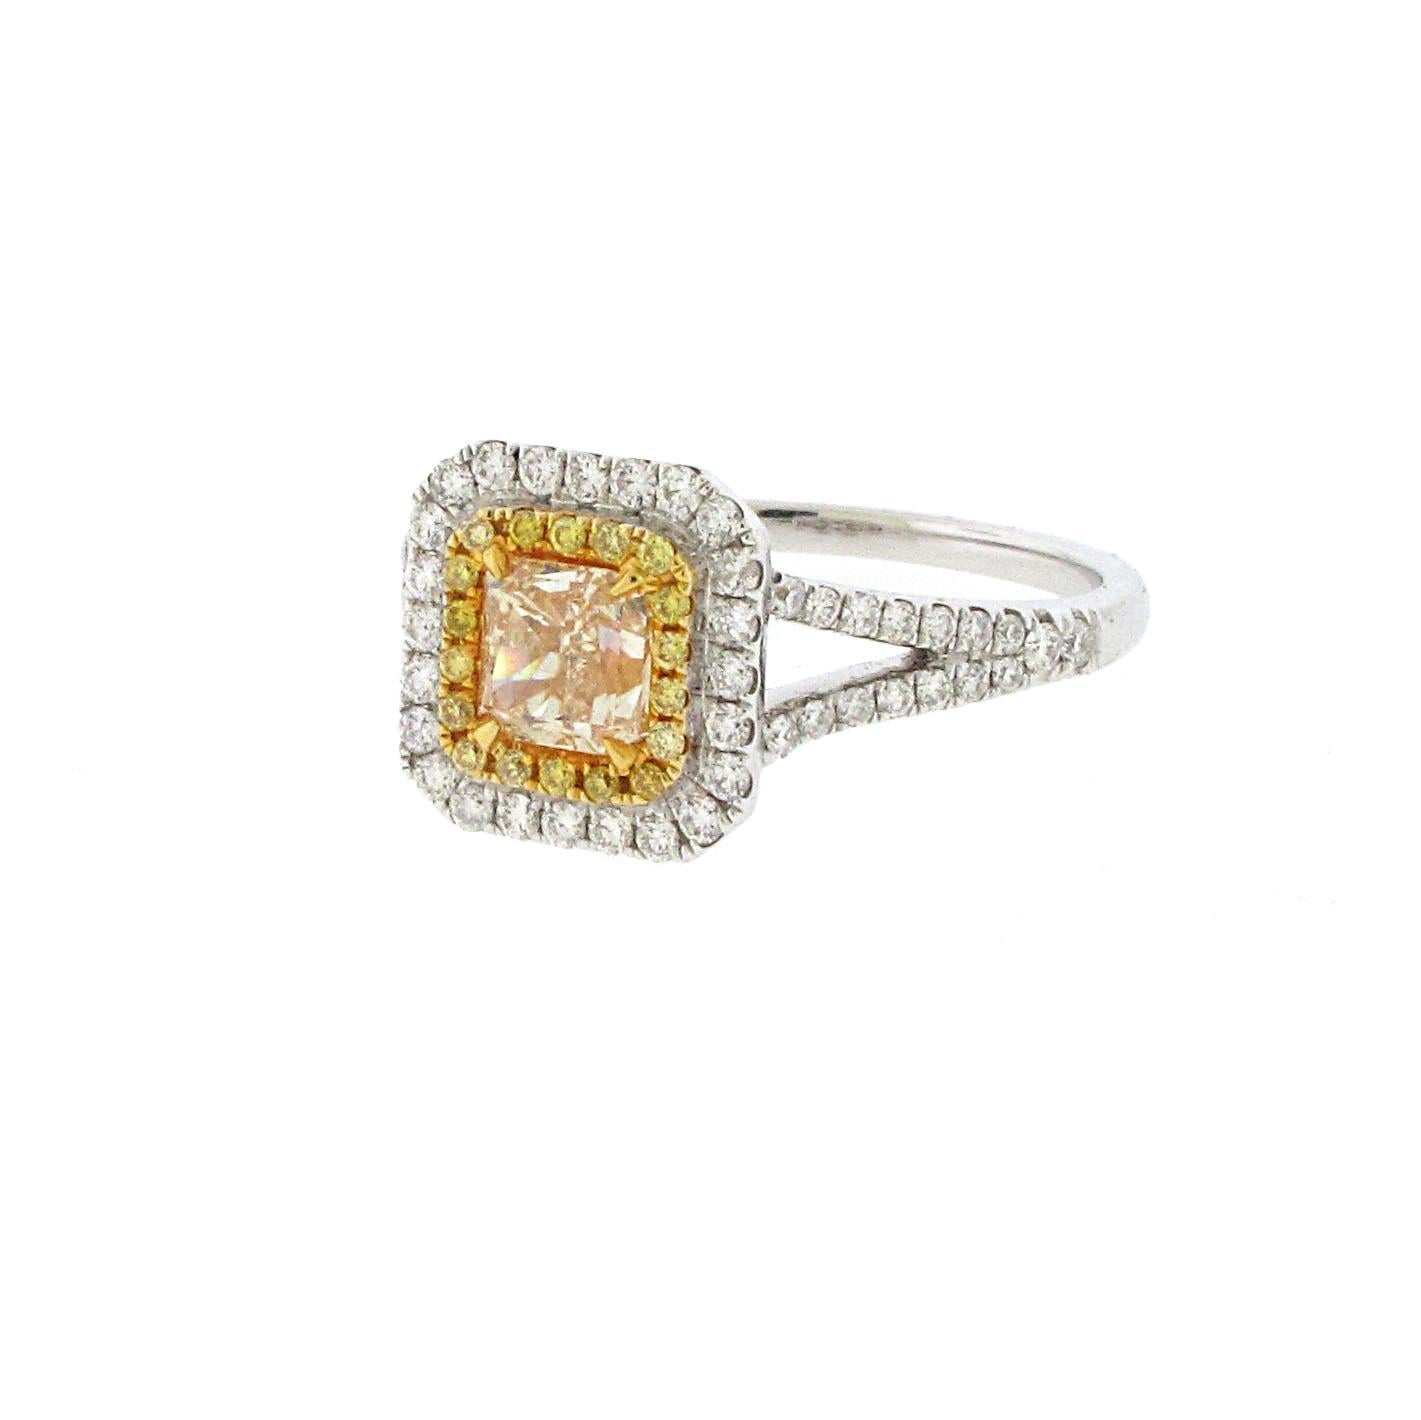 This is a huge looking ring for not a huge amount of money. Almost a 1ct center yellow diamond set in a double halo with yellow and white diamonds. The halo ring is the most popular setting style these days and yellow diamonds are making a big